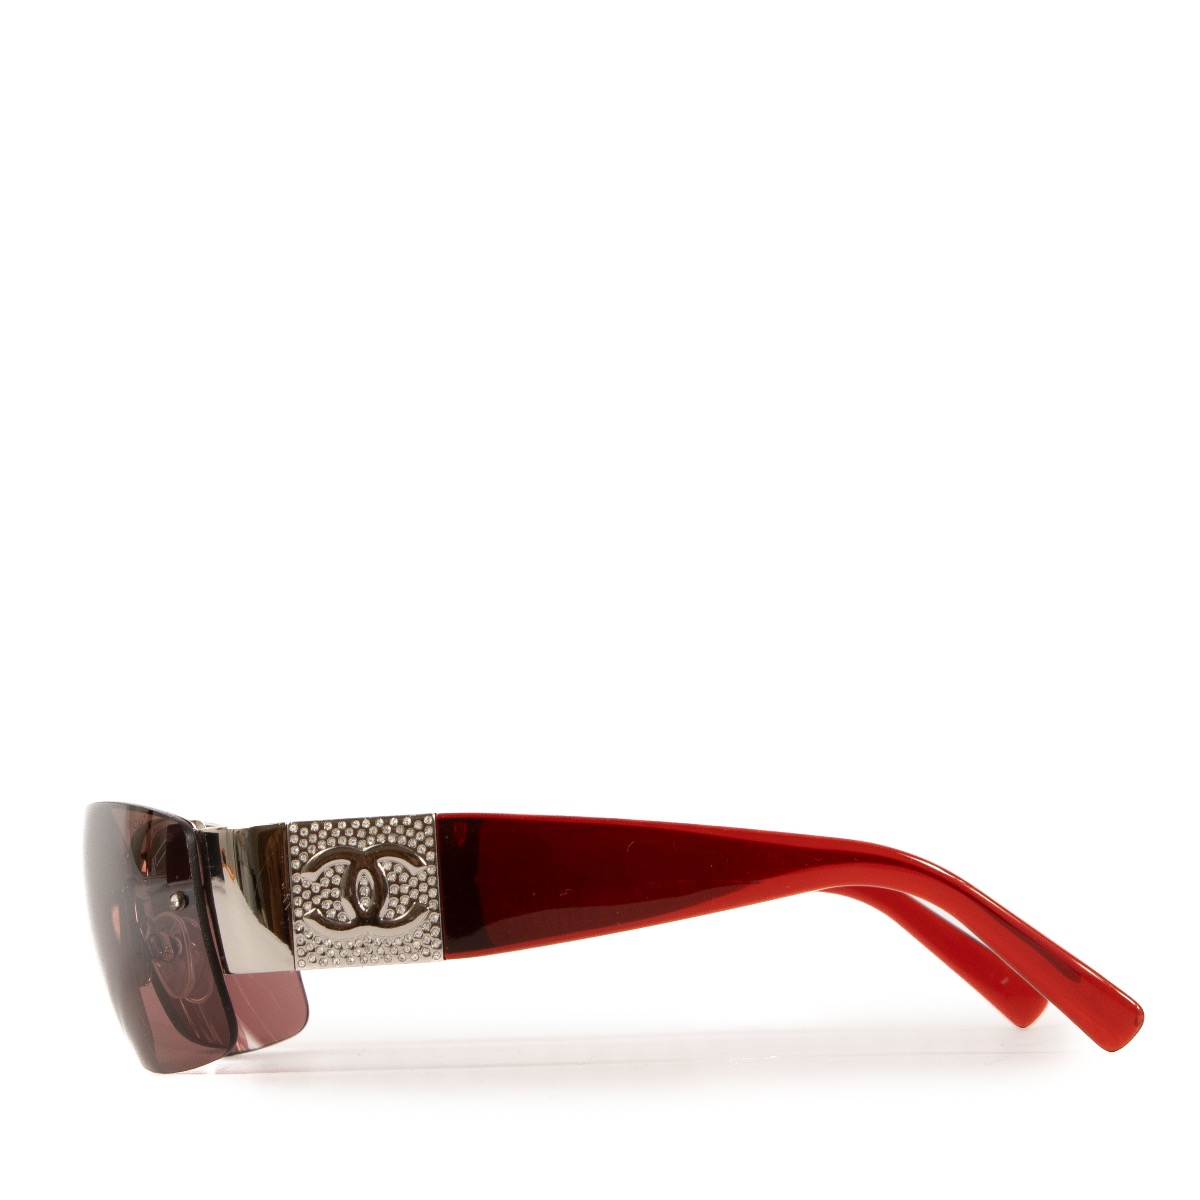 CHANEL Oval Sunglasses CH5467B Iridescent RedViolet Gradient at John Lewis   Partners